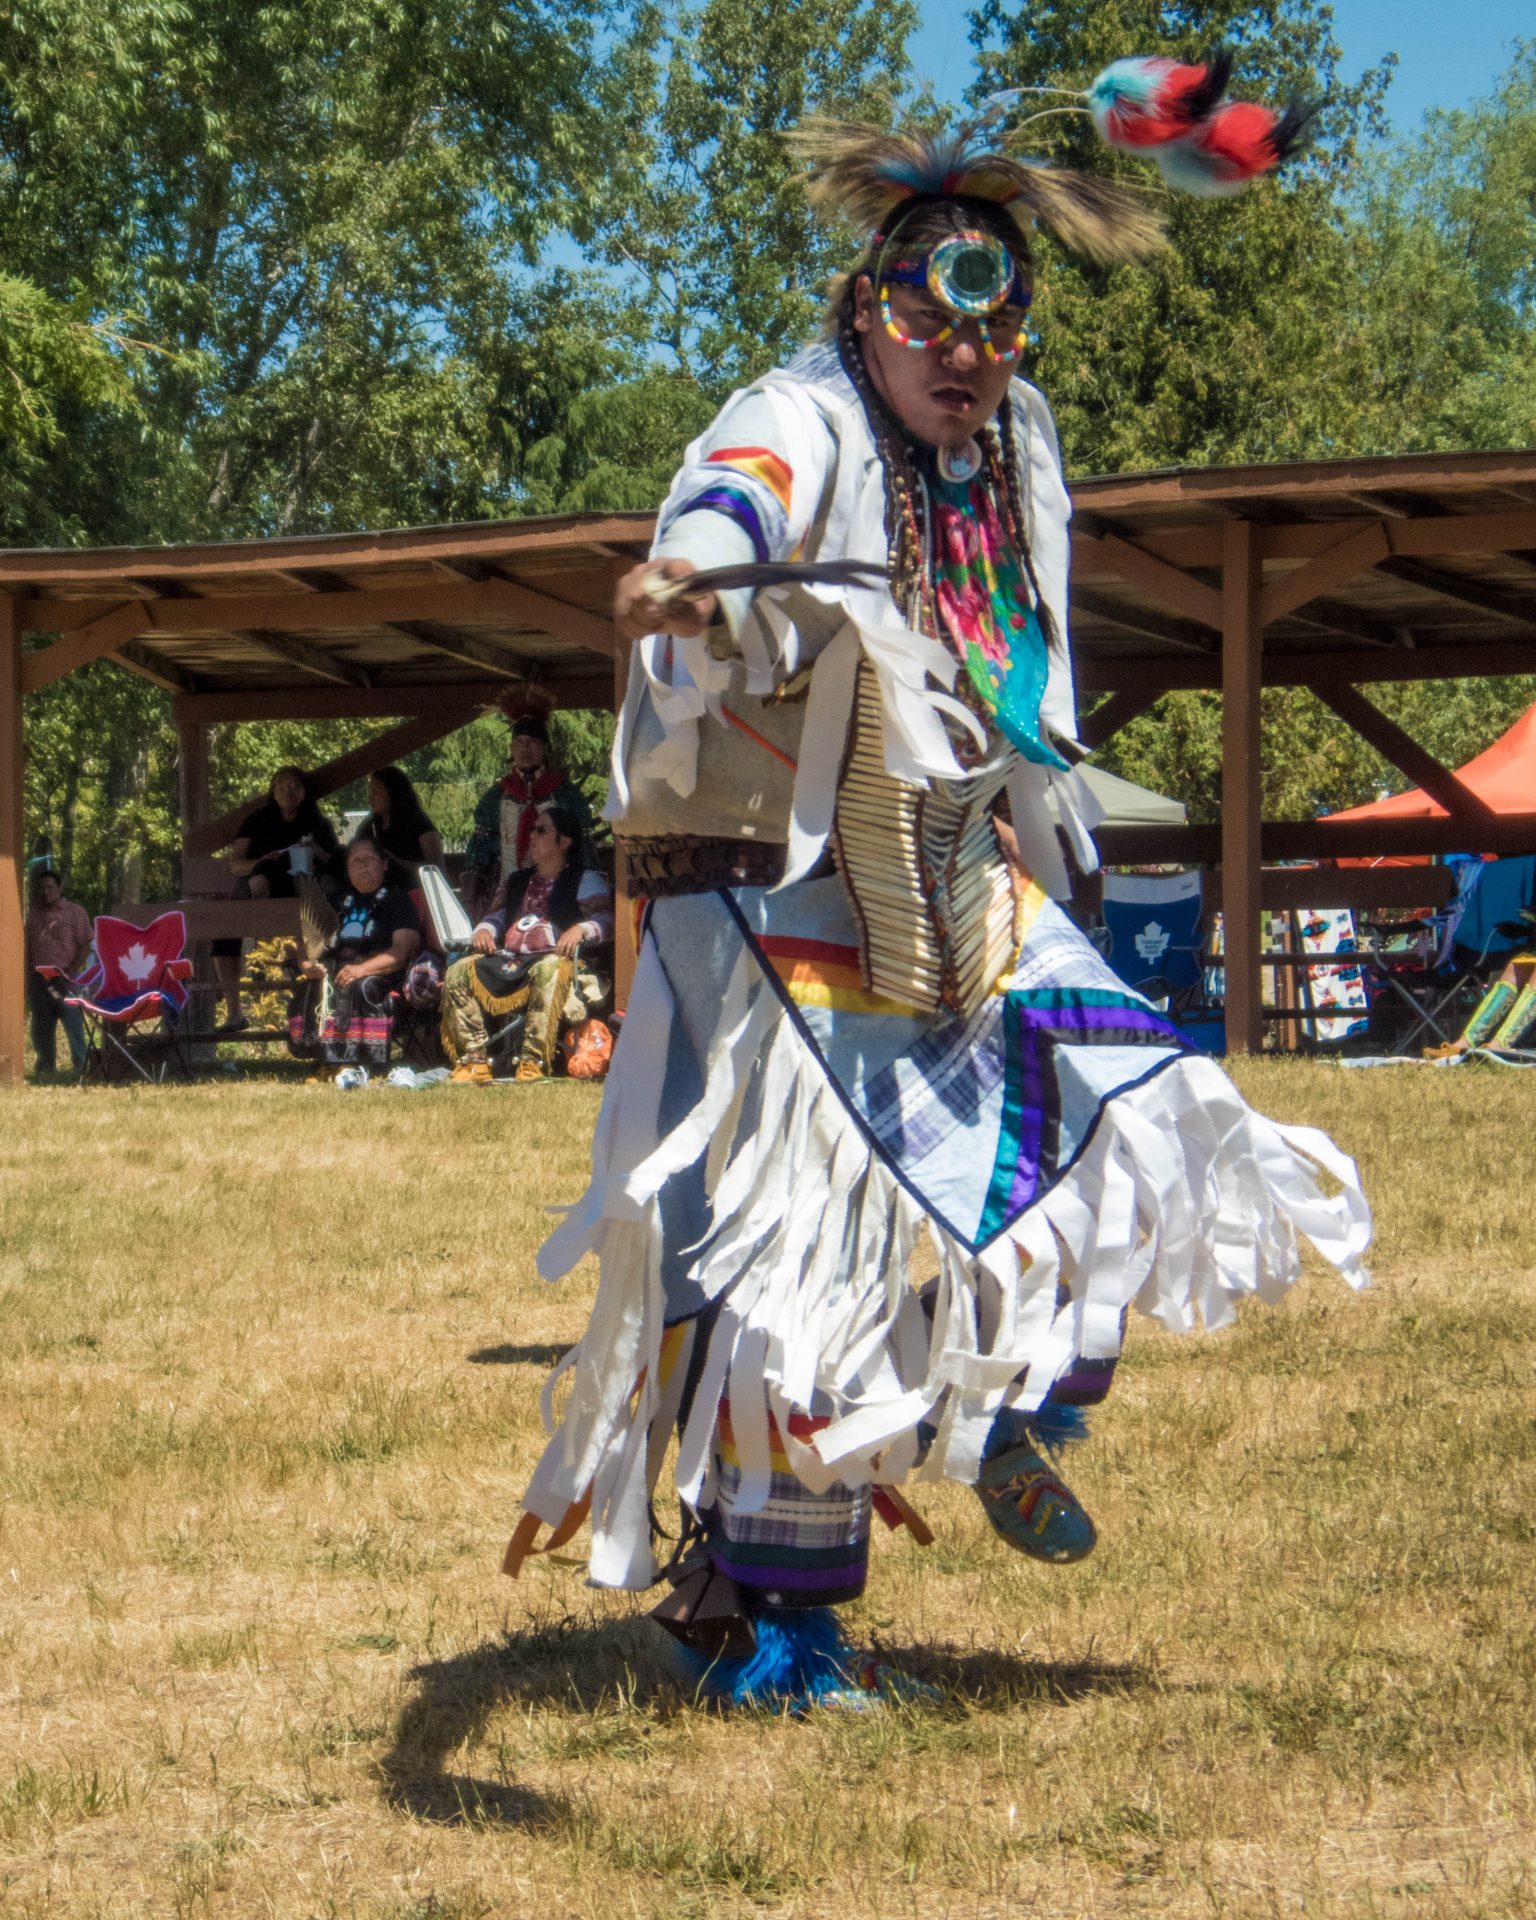 Man in regalia dancing at the Sheguiandah First Nation Traditional Pow Wow on Manitoulin Island.